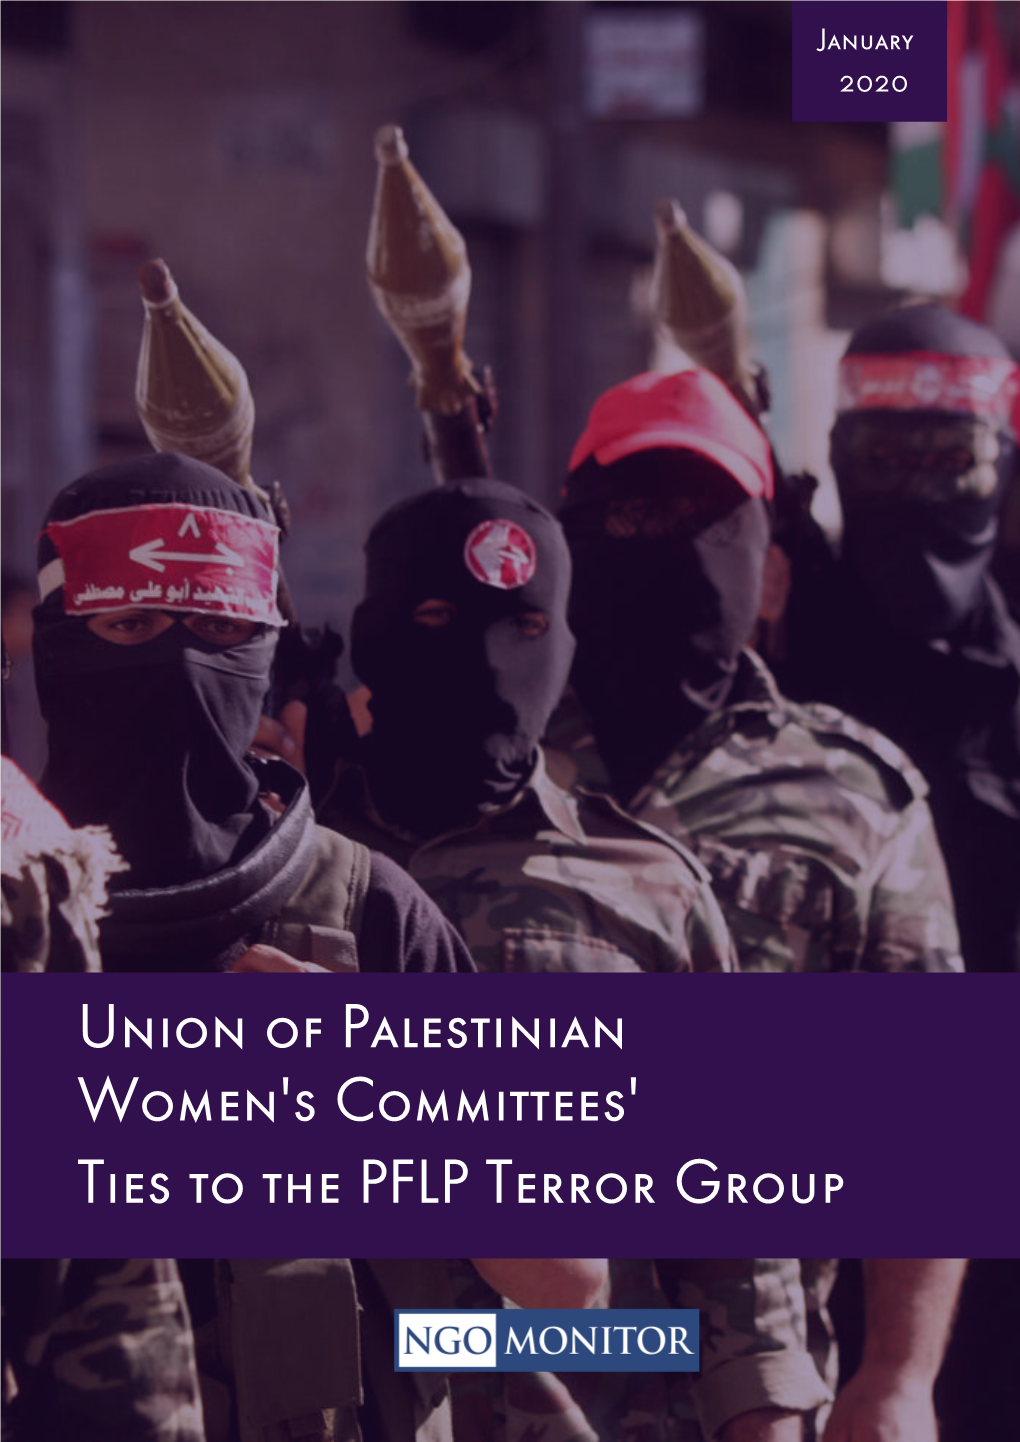 Union of Palestinian Women's Committees' Ties to the PFLP Terror Group